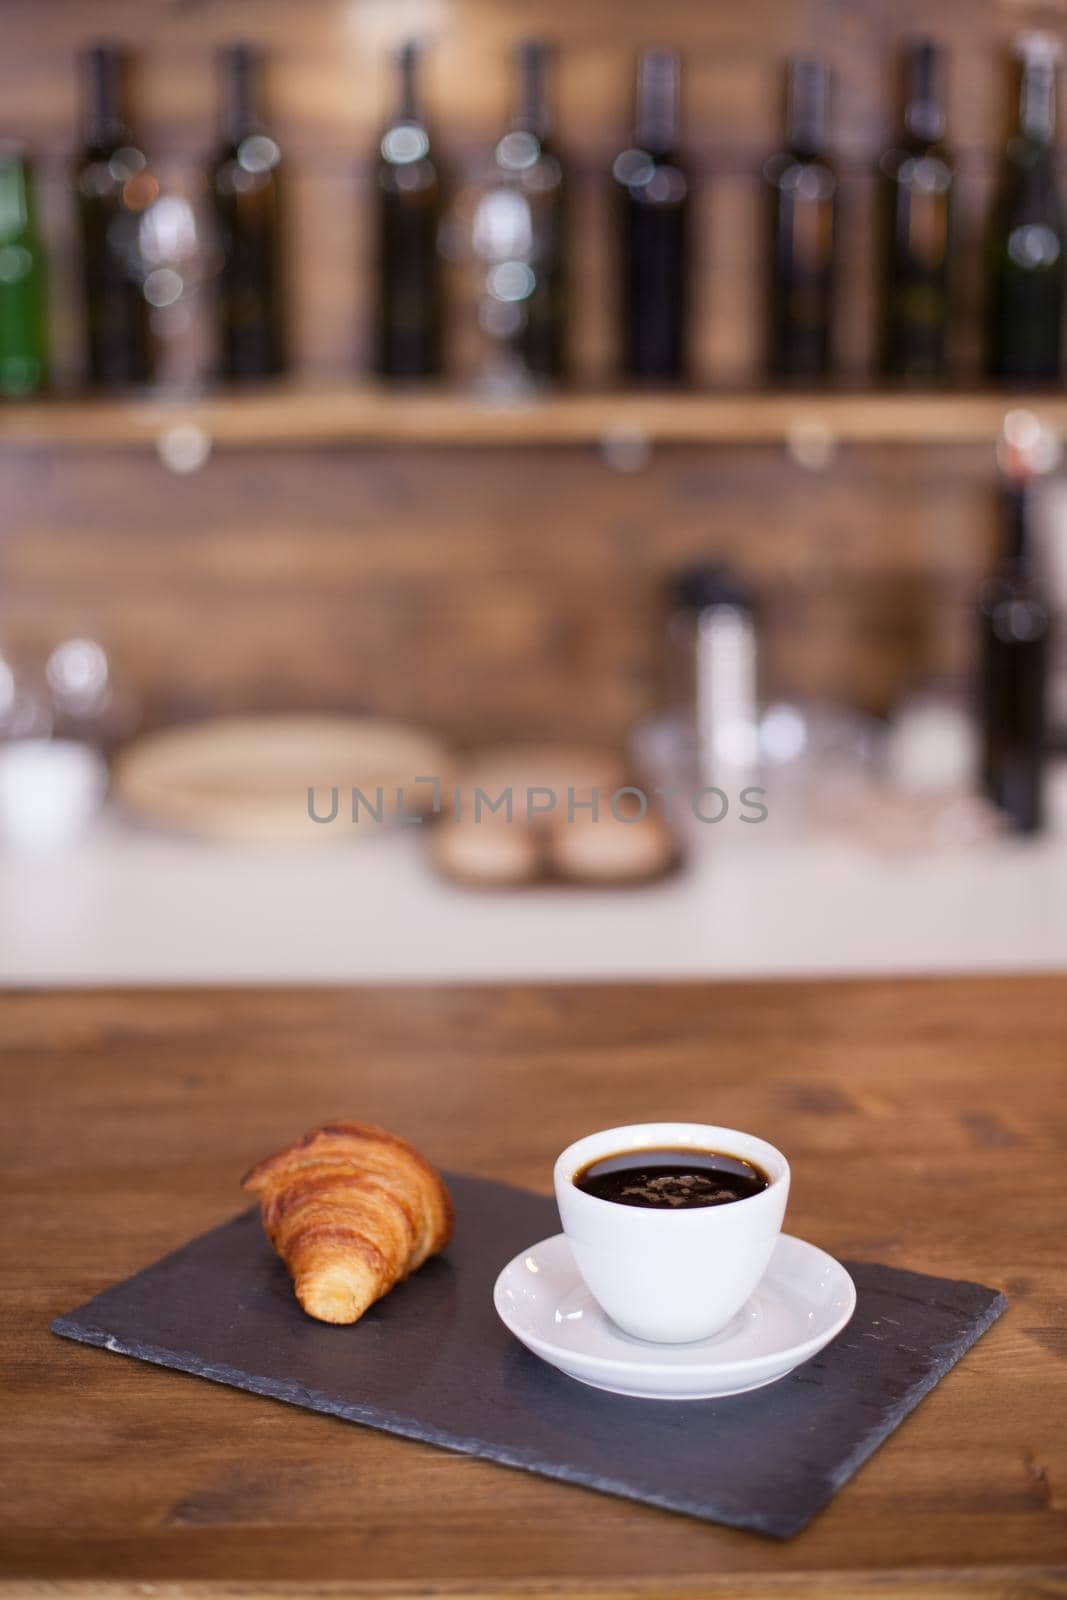 Black coffee served on the bar counter with blurred background. Tasty croissant.